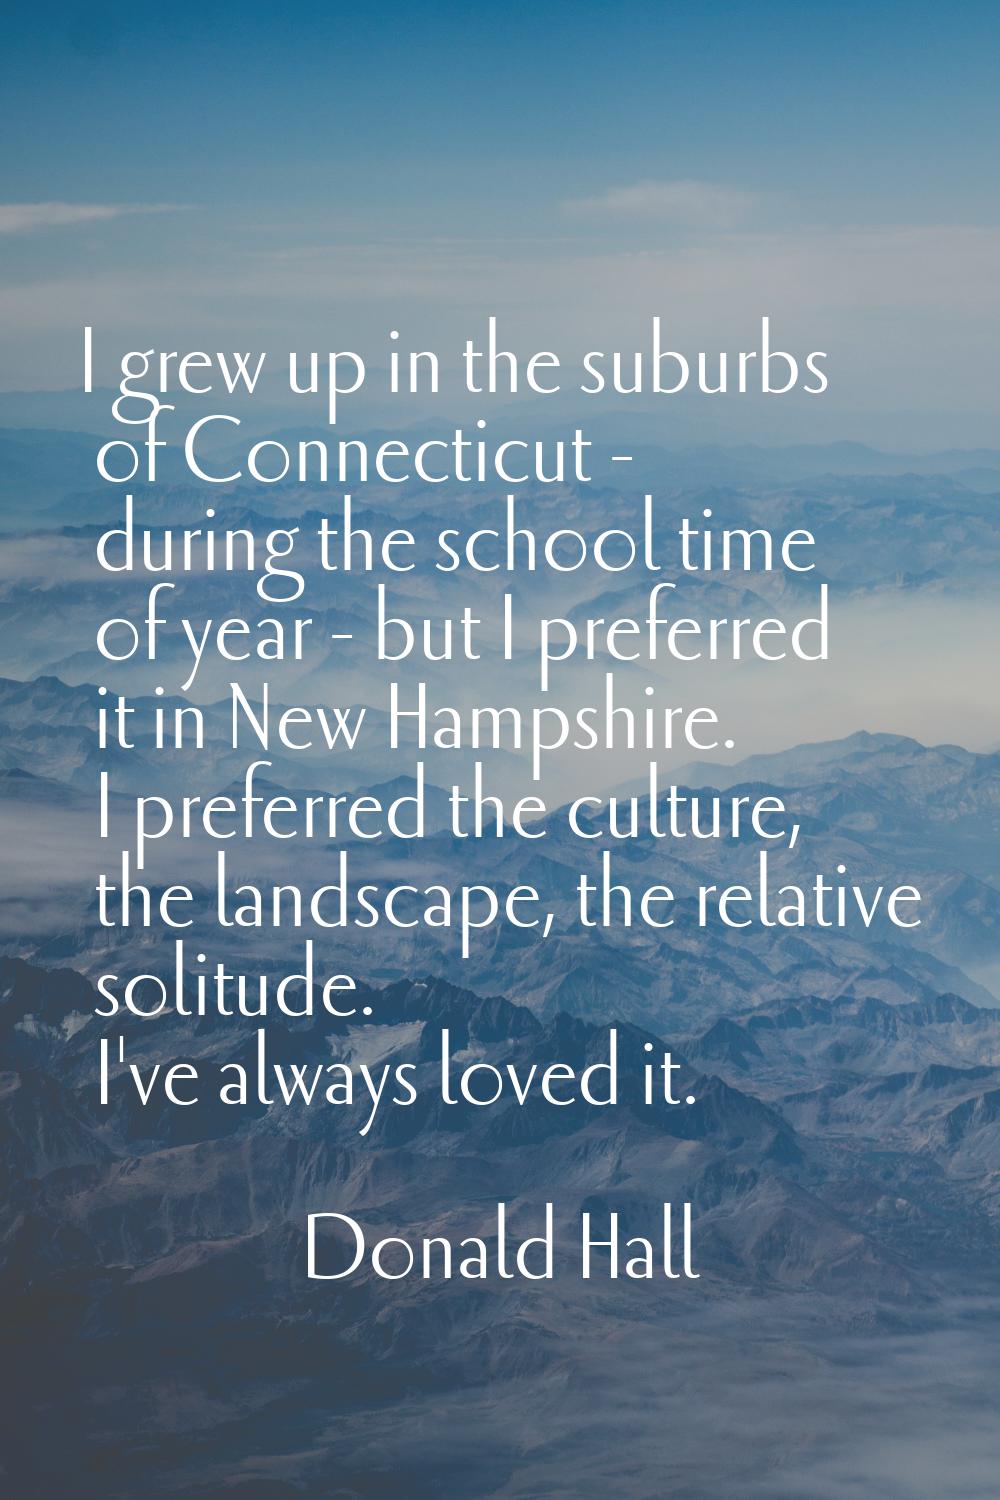 I grew up in the suburbs of Connecticut - during the school time of year - but I preferred it in Ne